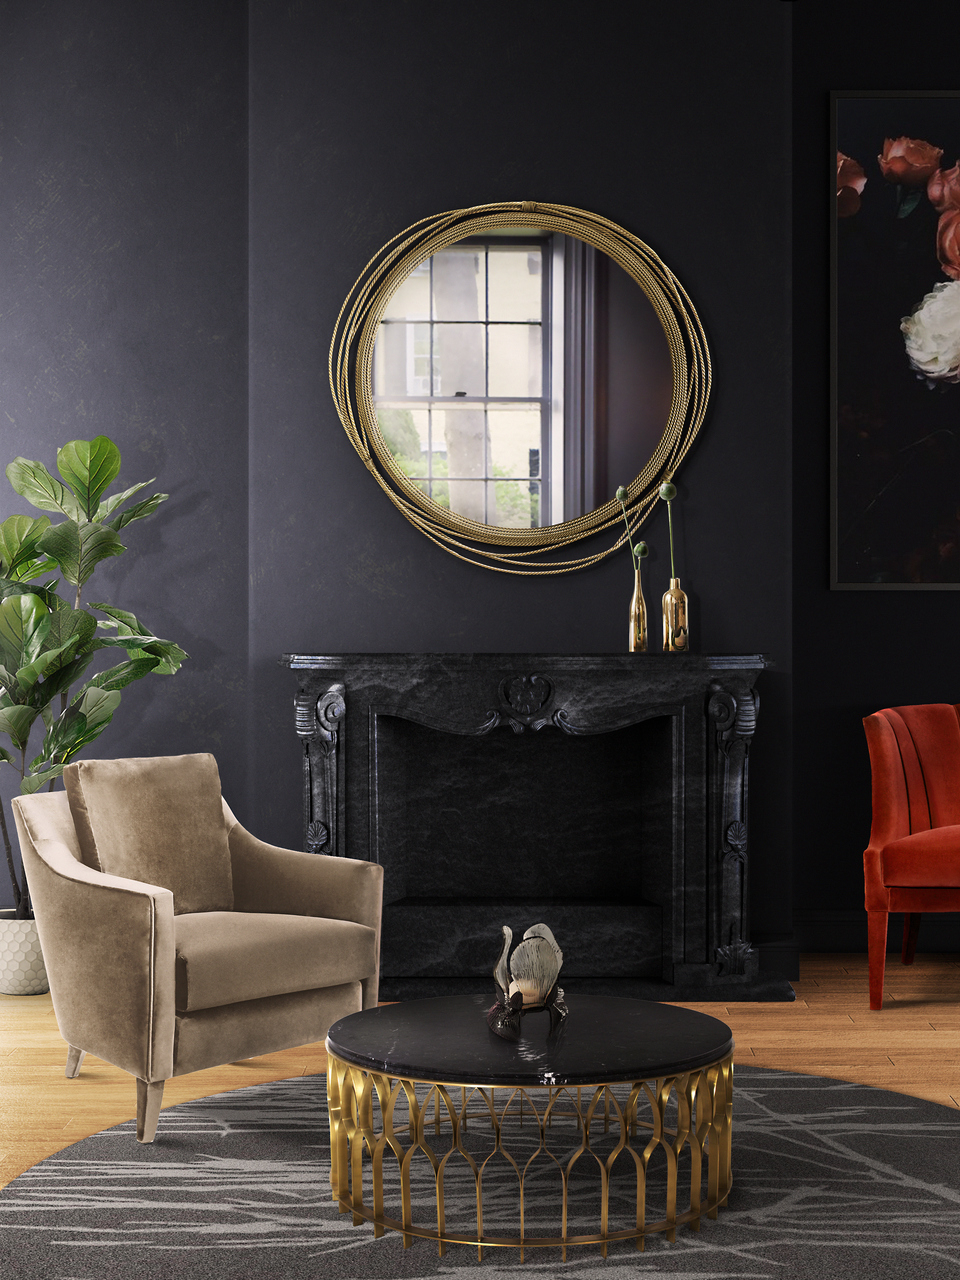 Dark Living Room Design Ideas With Golden Coffee Table - Home'Society